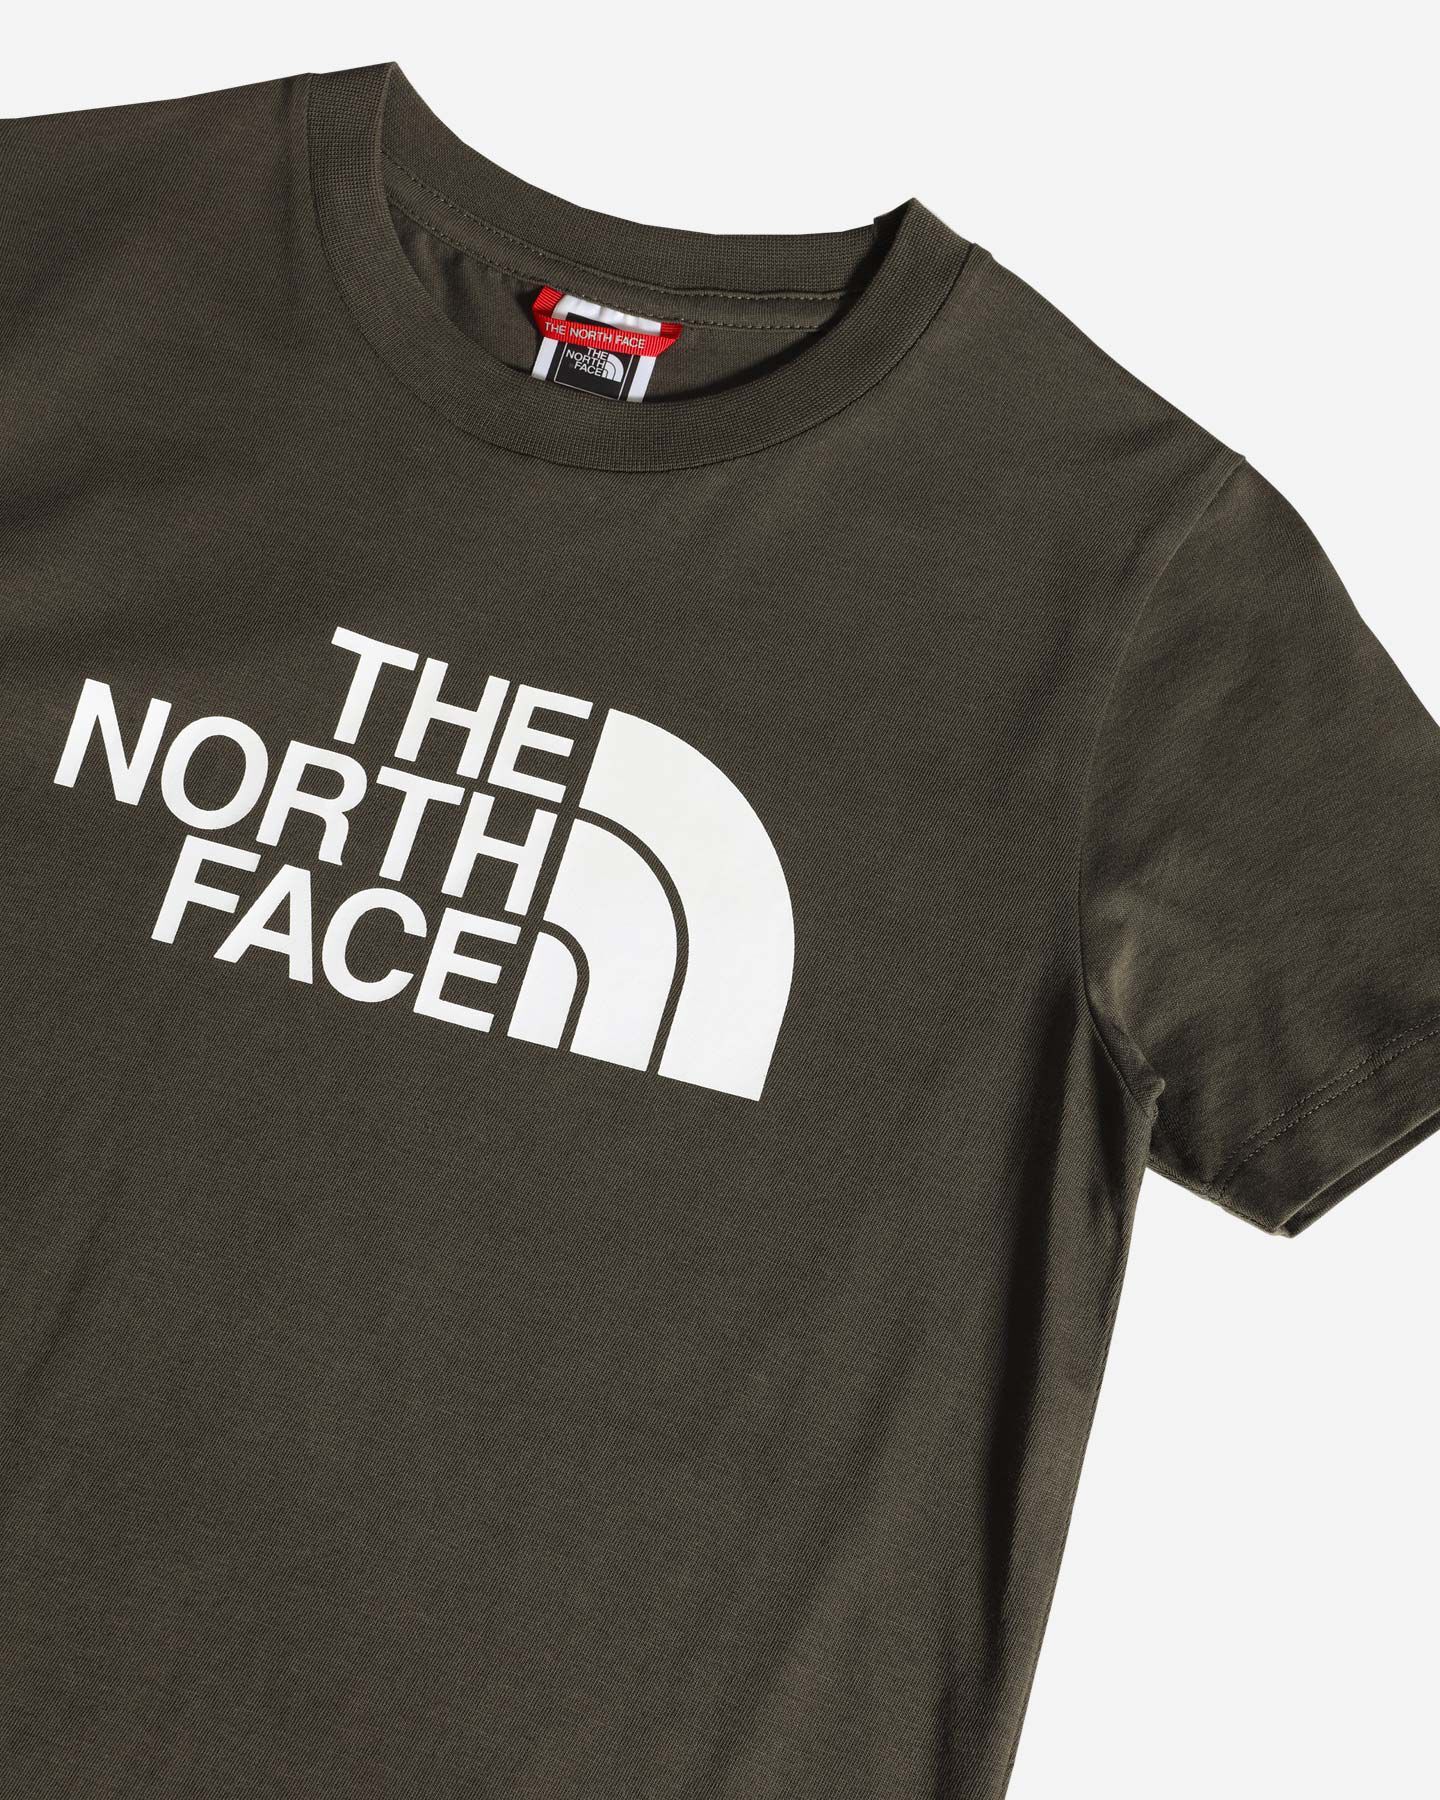  T-Shirt THE NORTH FACE EASY  JR S5241415 scatto 2